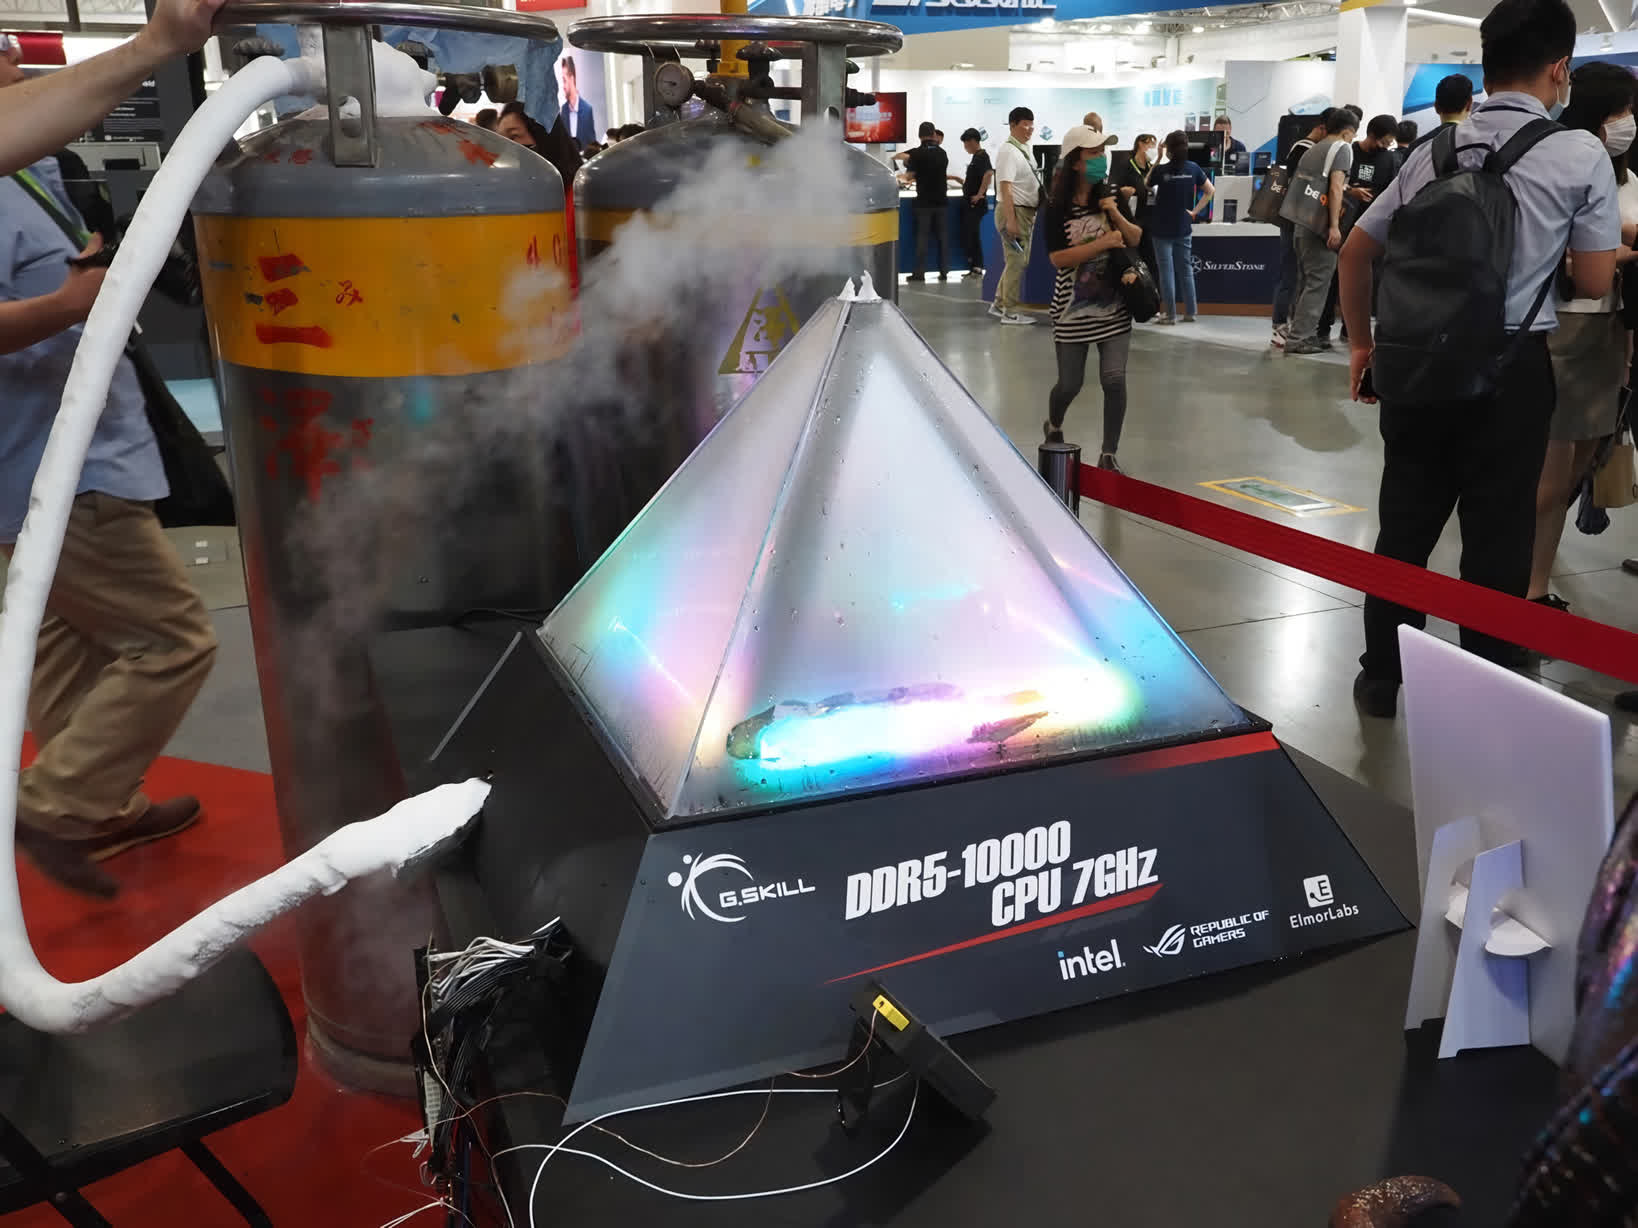 G.Skill shows off highly overclocked 7 GHz pyramid PC cooled with liquid nitrogen